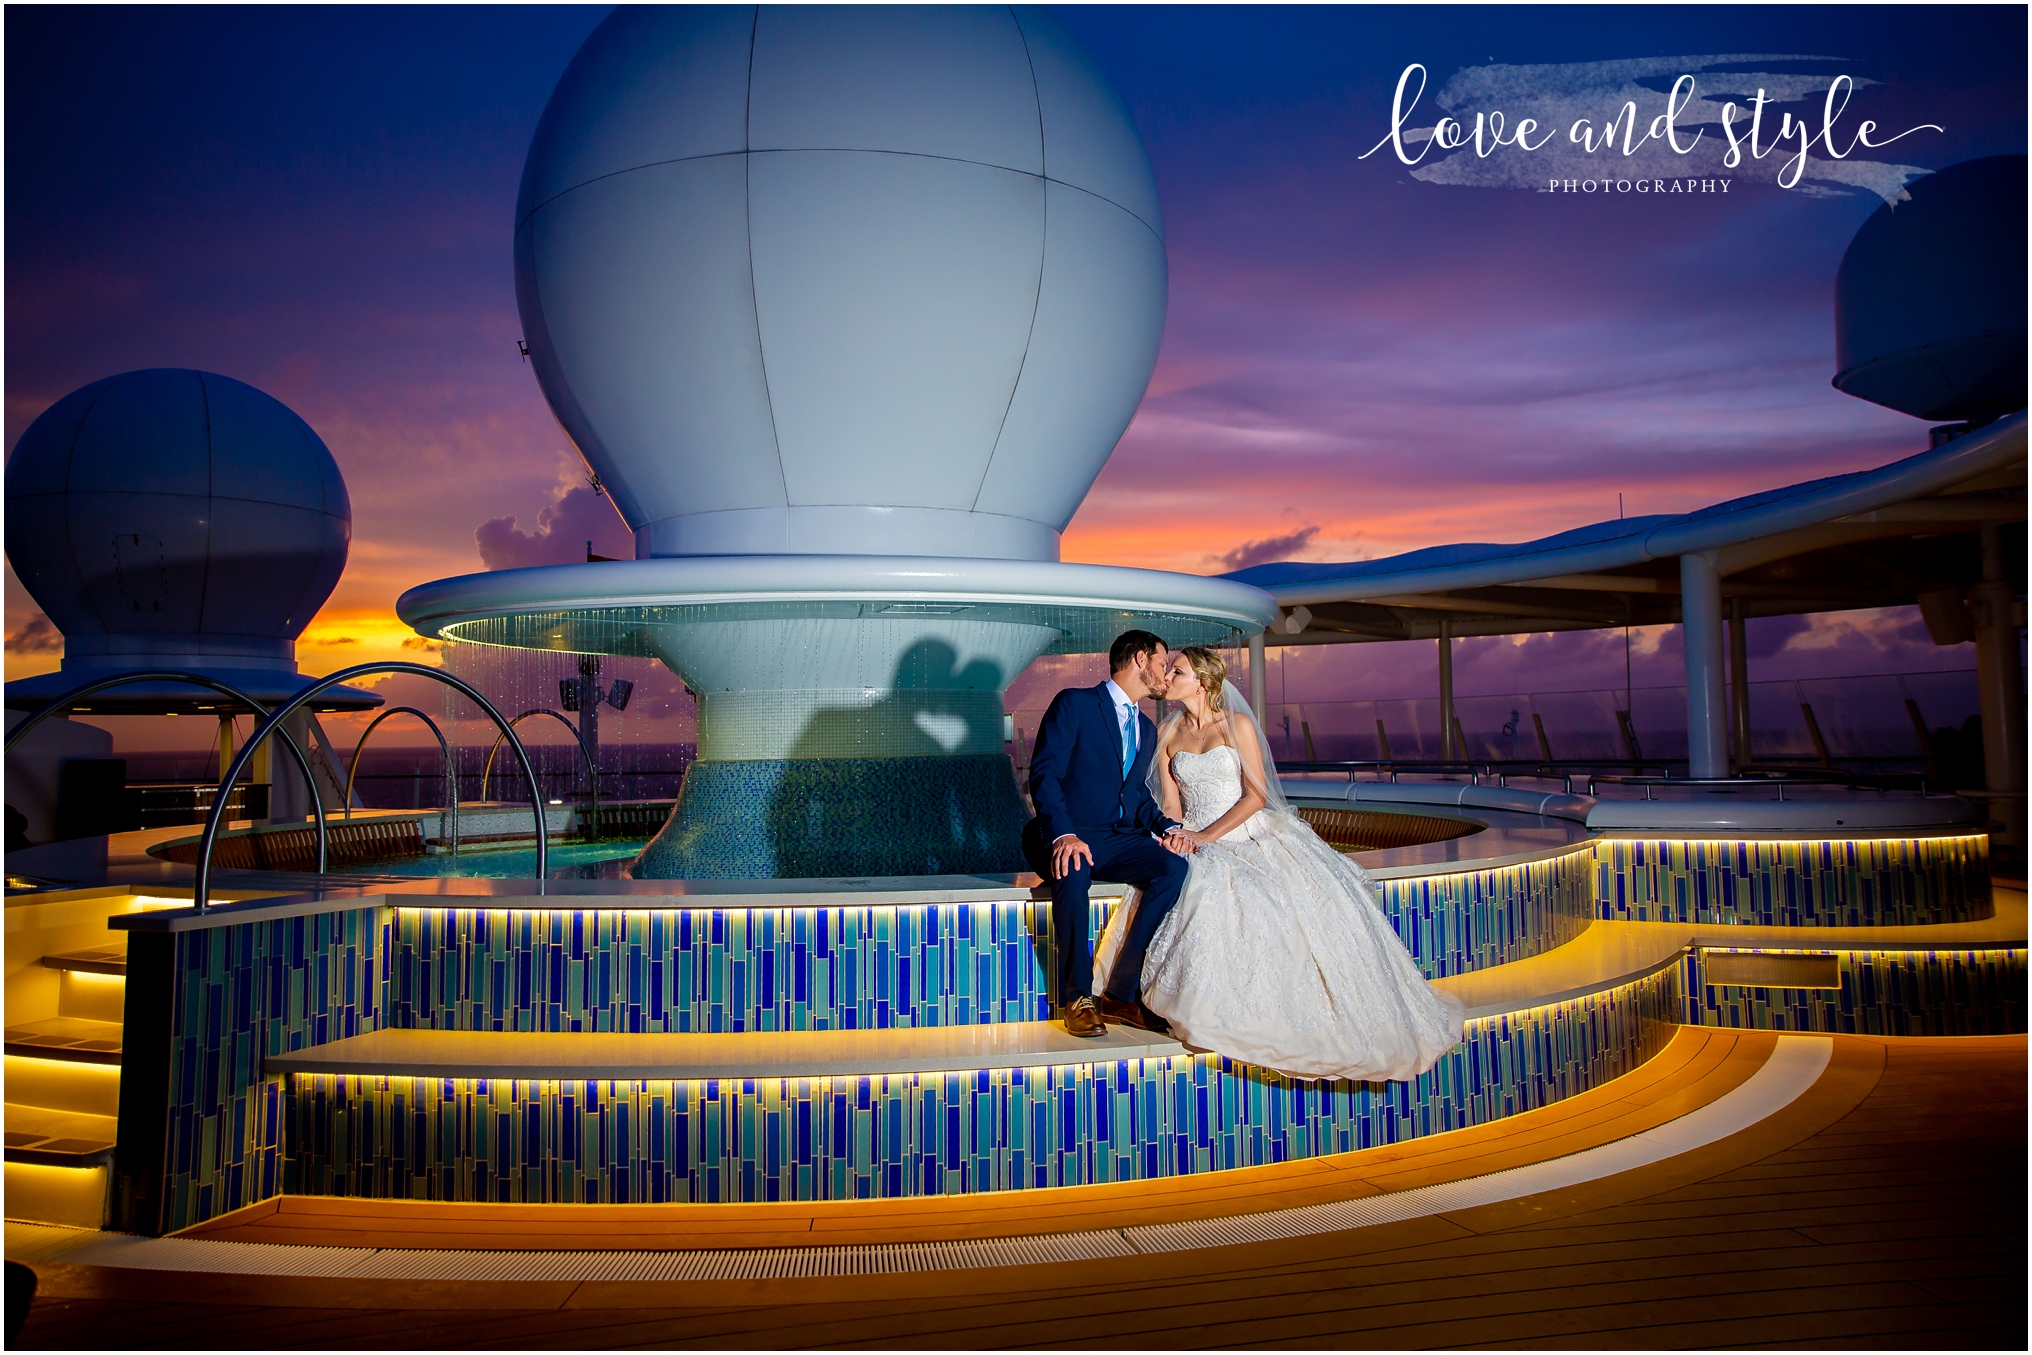 Disney Dream Cruise Wedding Photography, bride and groom portrait at sunset